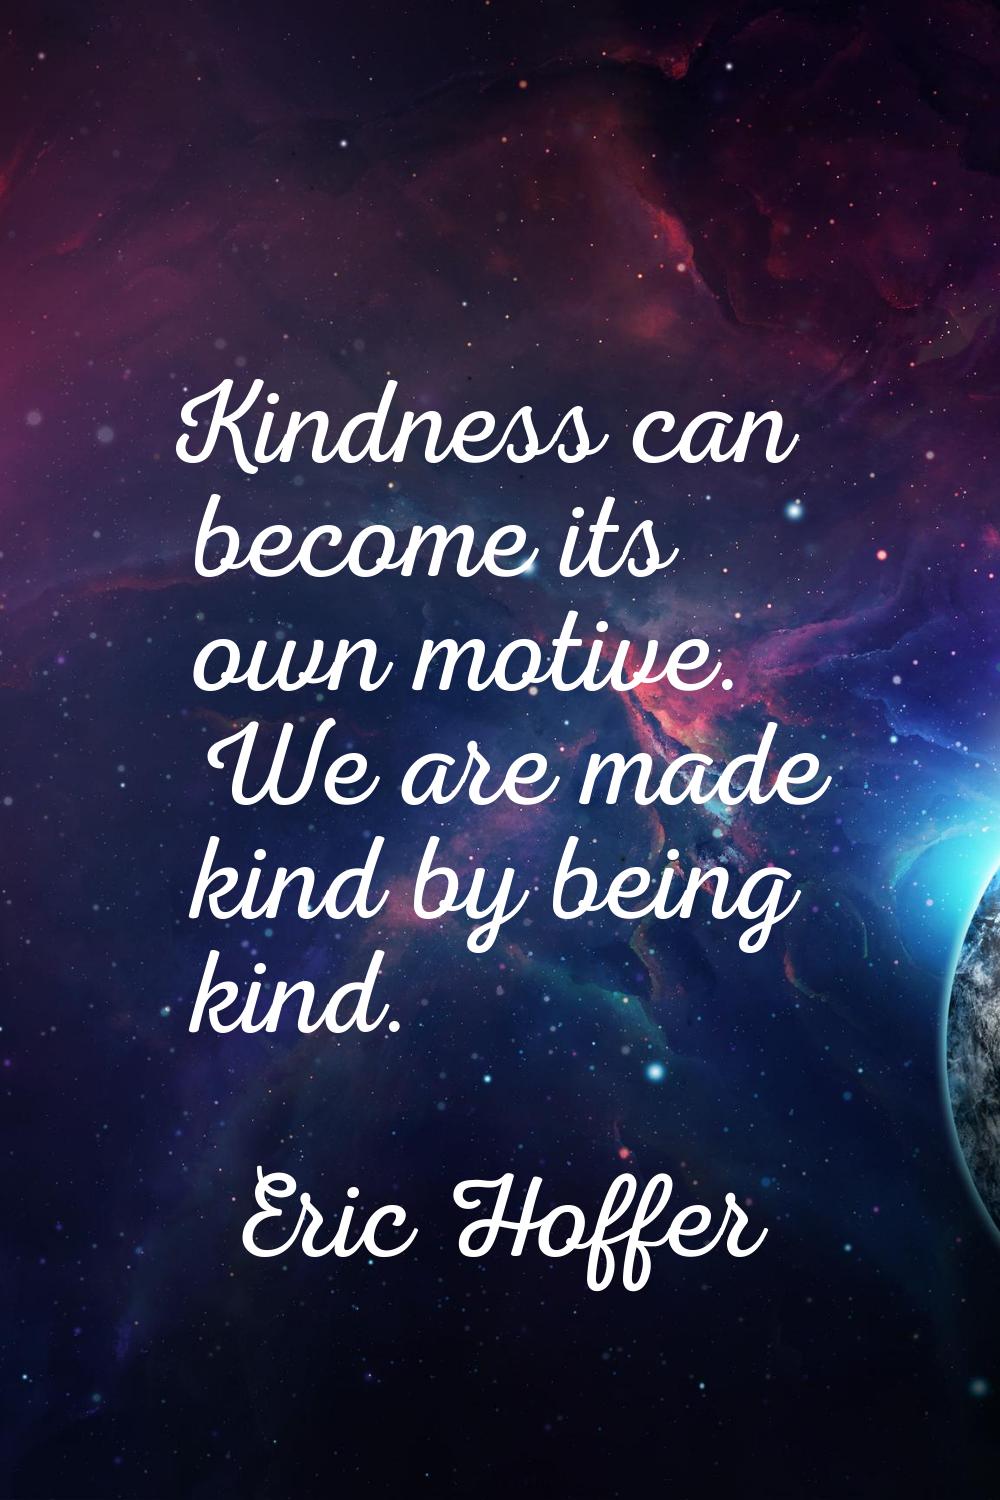 Kindness can become its own motive. We are made kind by being kind.